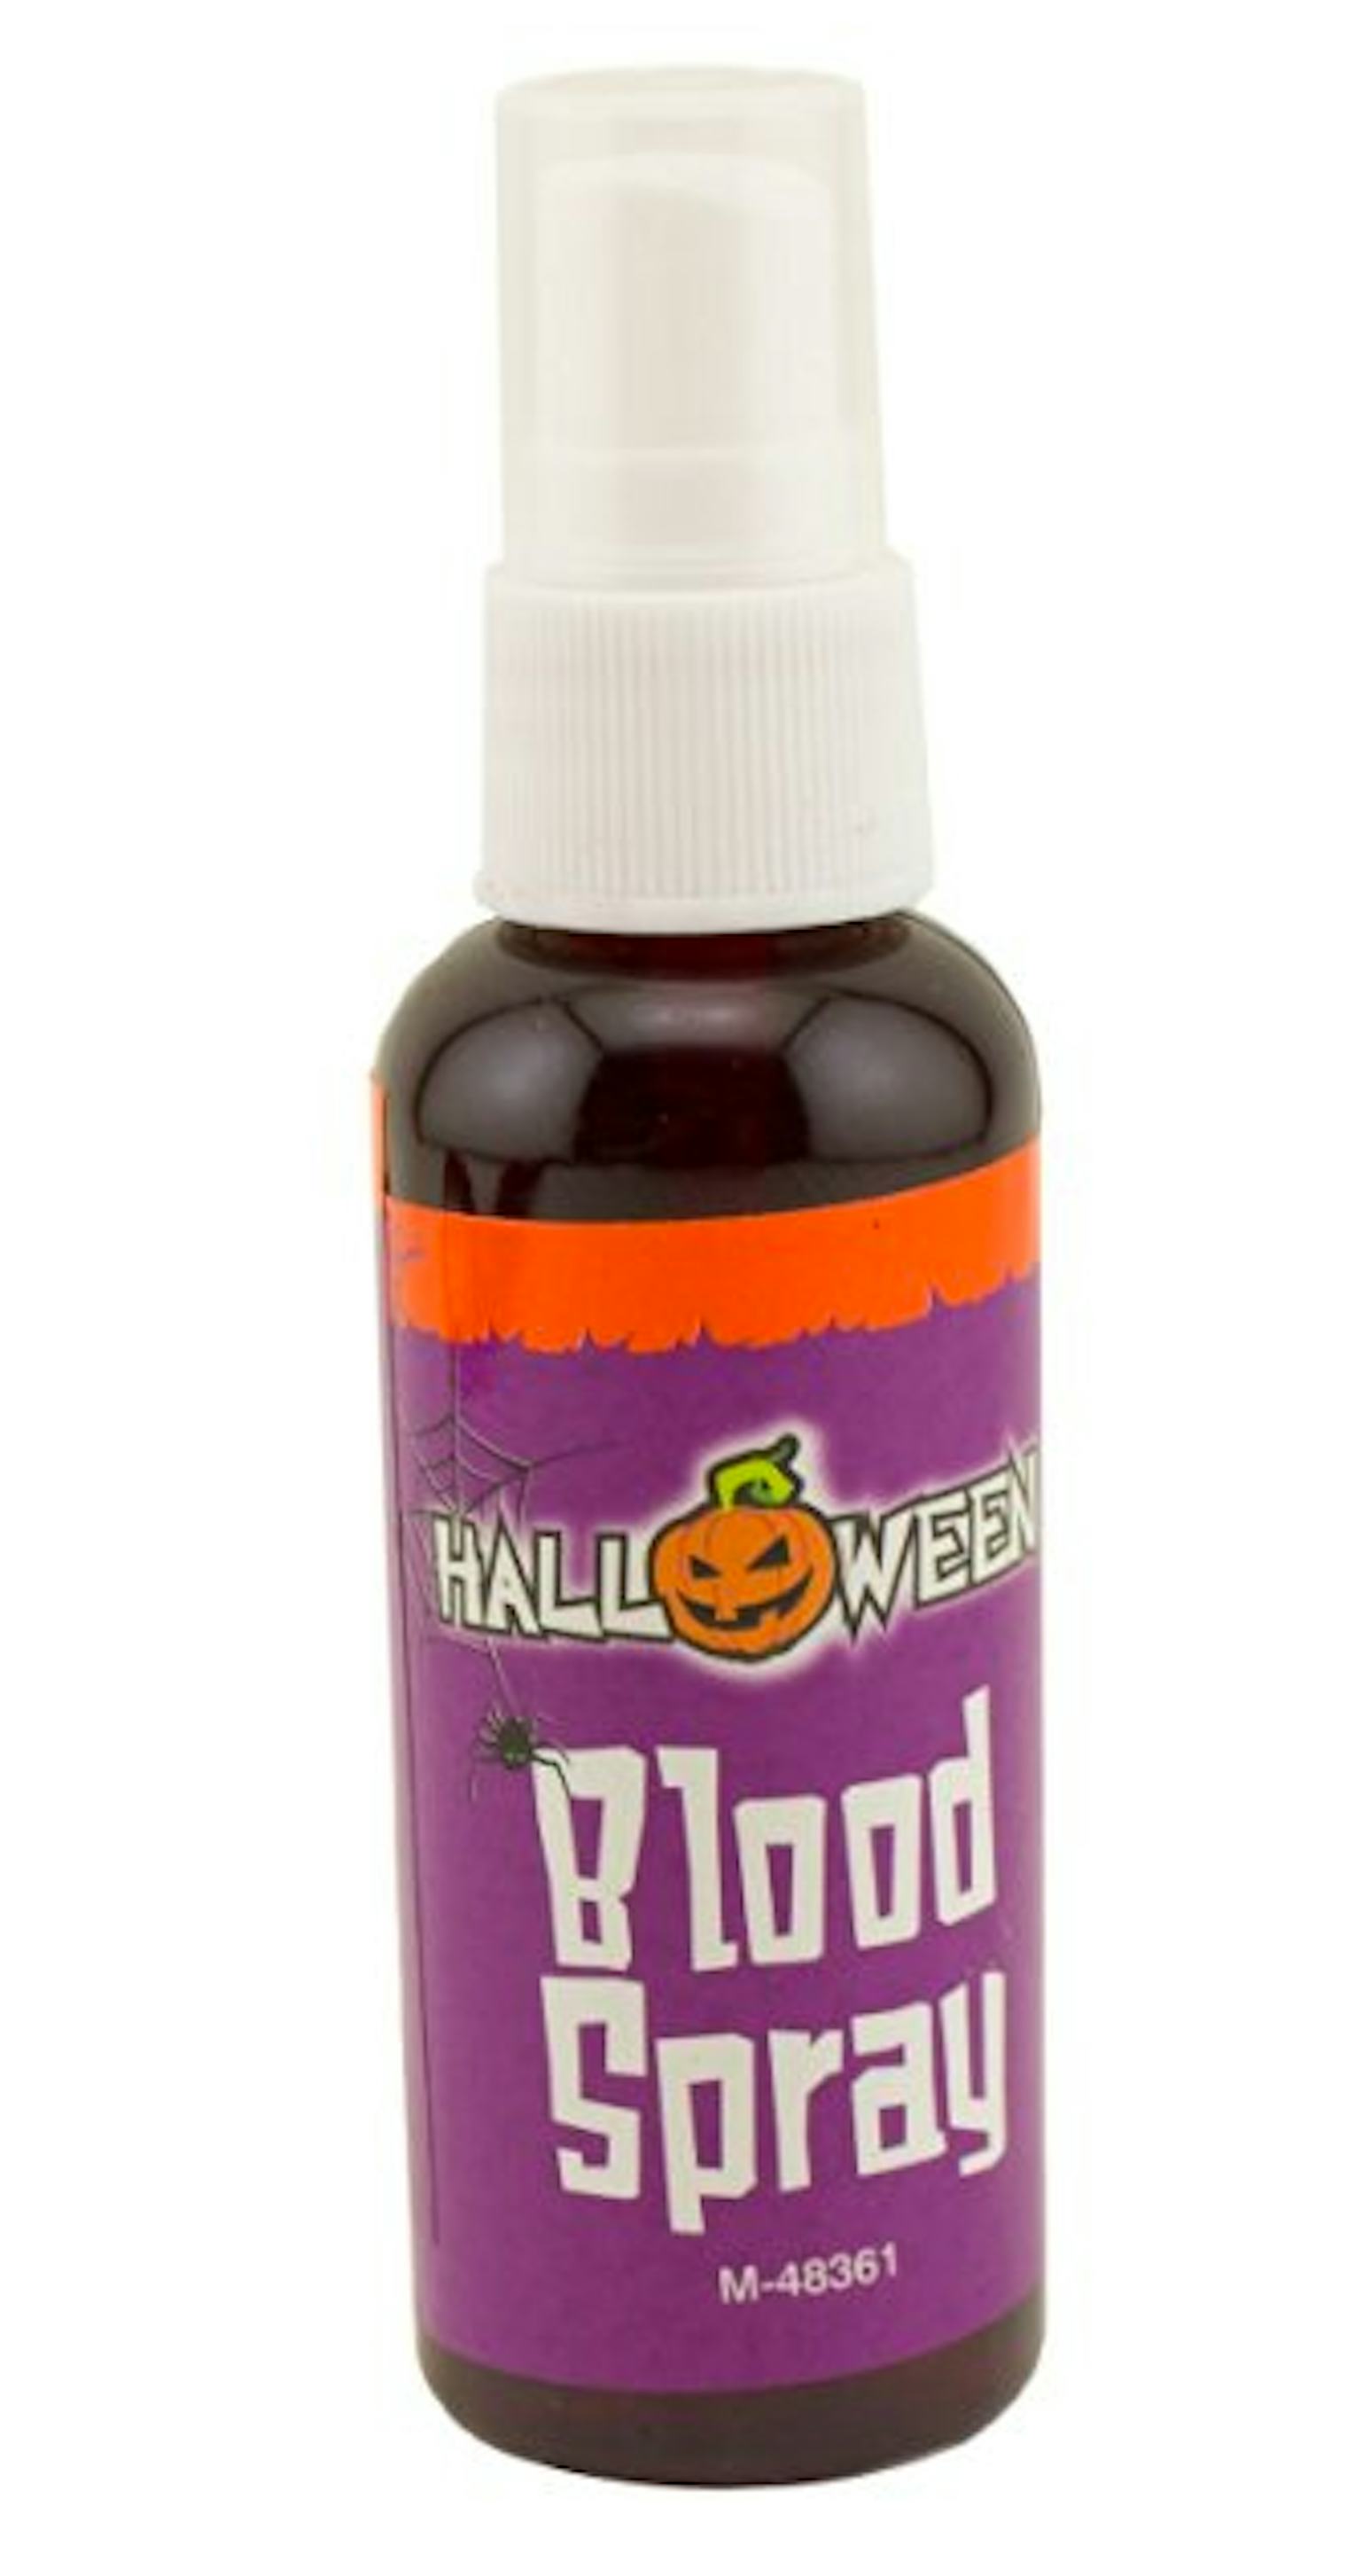 Cheap Fake Blood To Buy For Halloween, Because It's A Creepy Costume ...